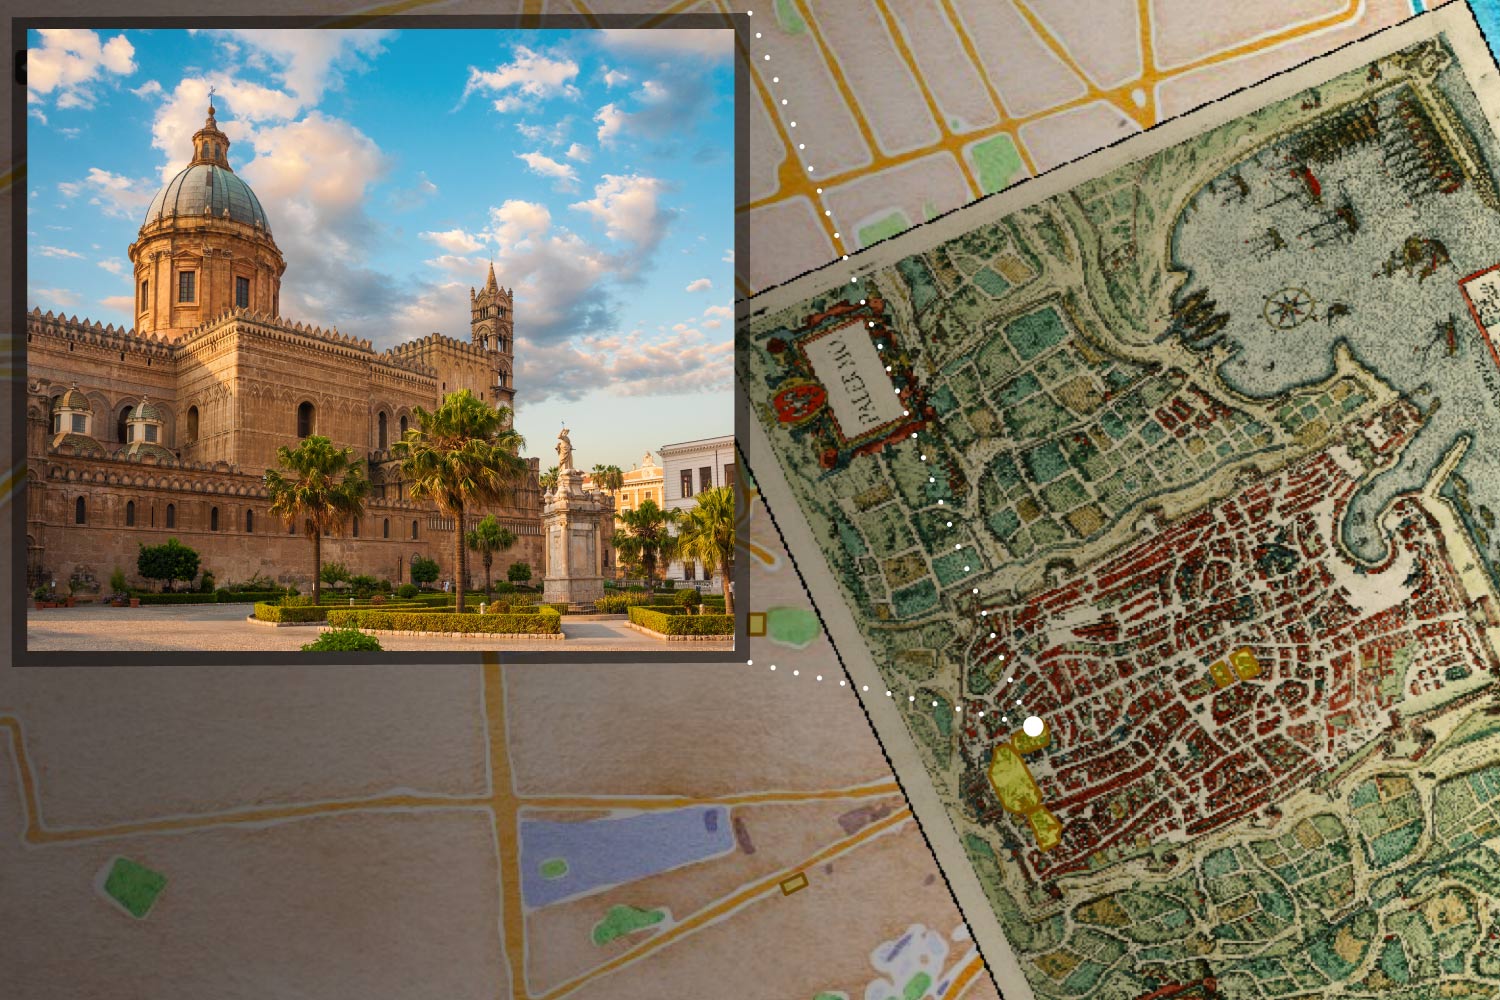 This rendering of Neatline elements shows an image of the Cathedral of Palermo and its location on the medieval map of the city. Lisa Reilly’s architectural project has a full description of the cathedral that appears when it is clicked on the map.